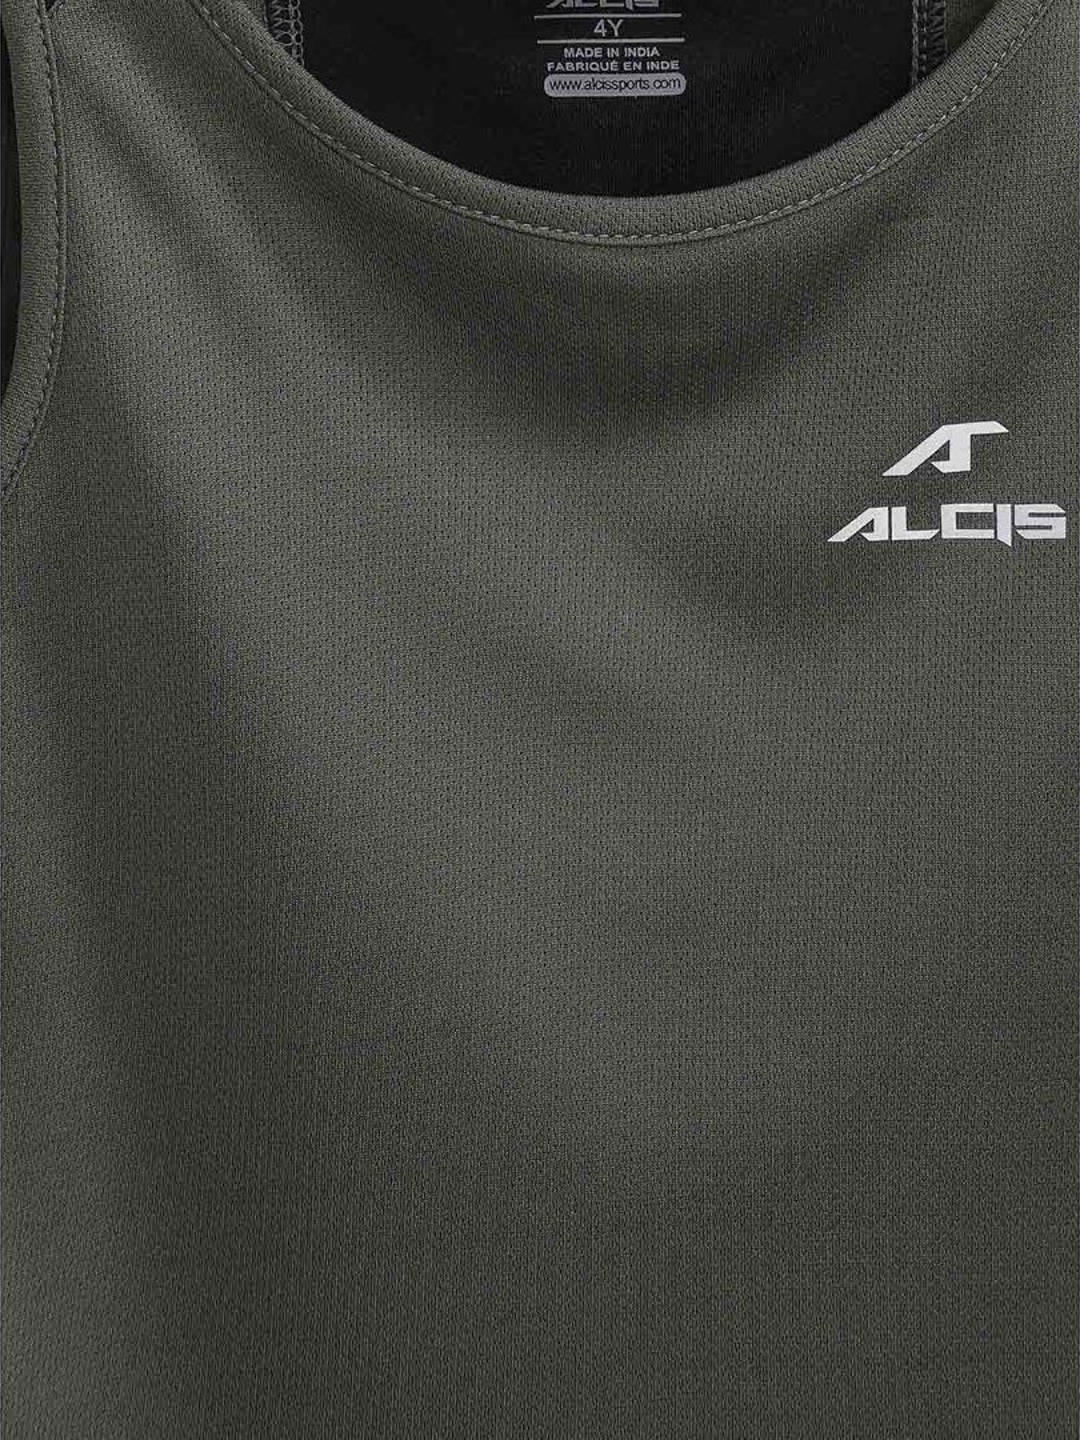 Alcis Boys Charcoal Grey Solid Slim Fit Round Neck T-shirt